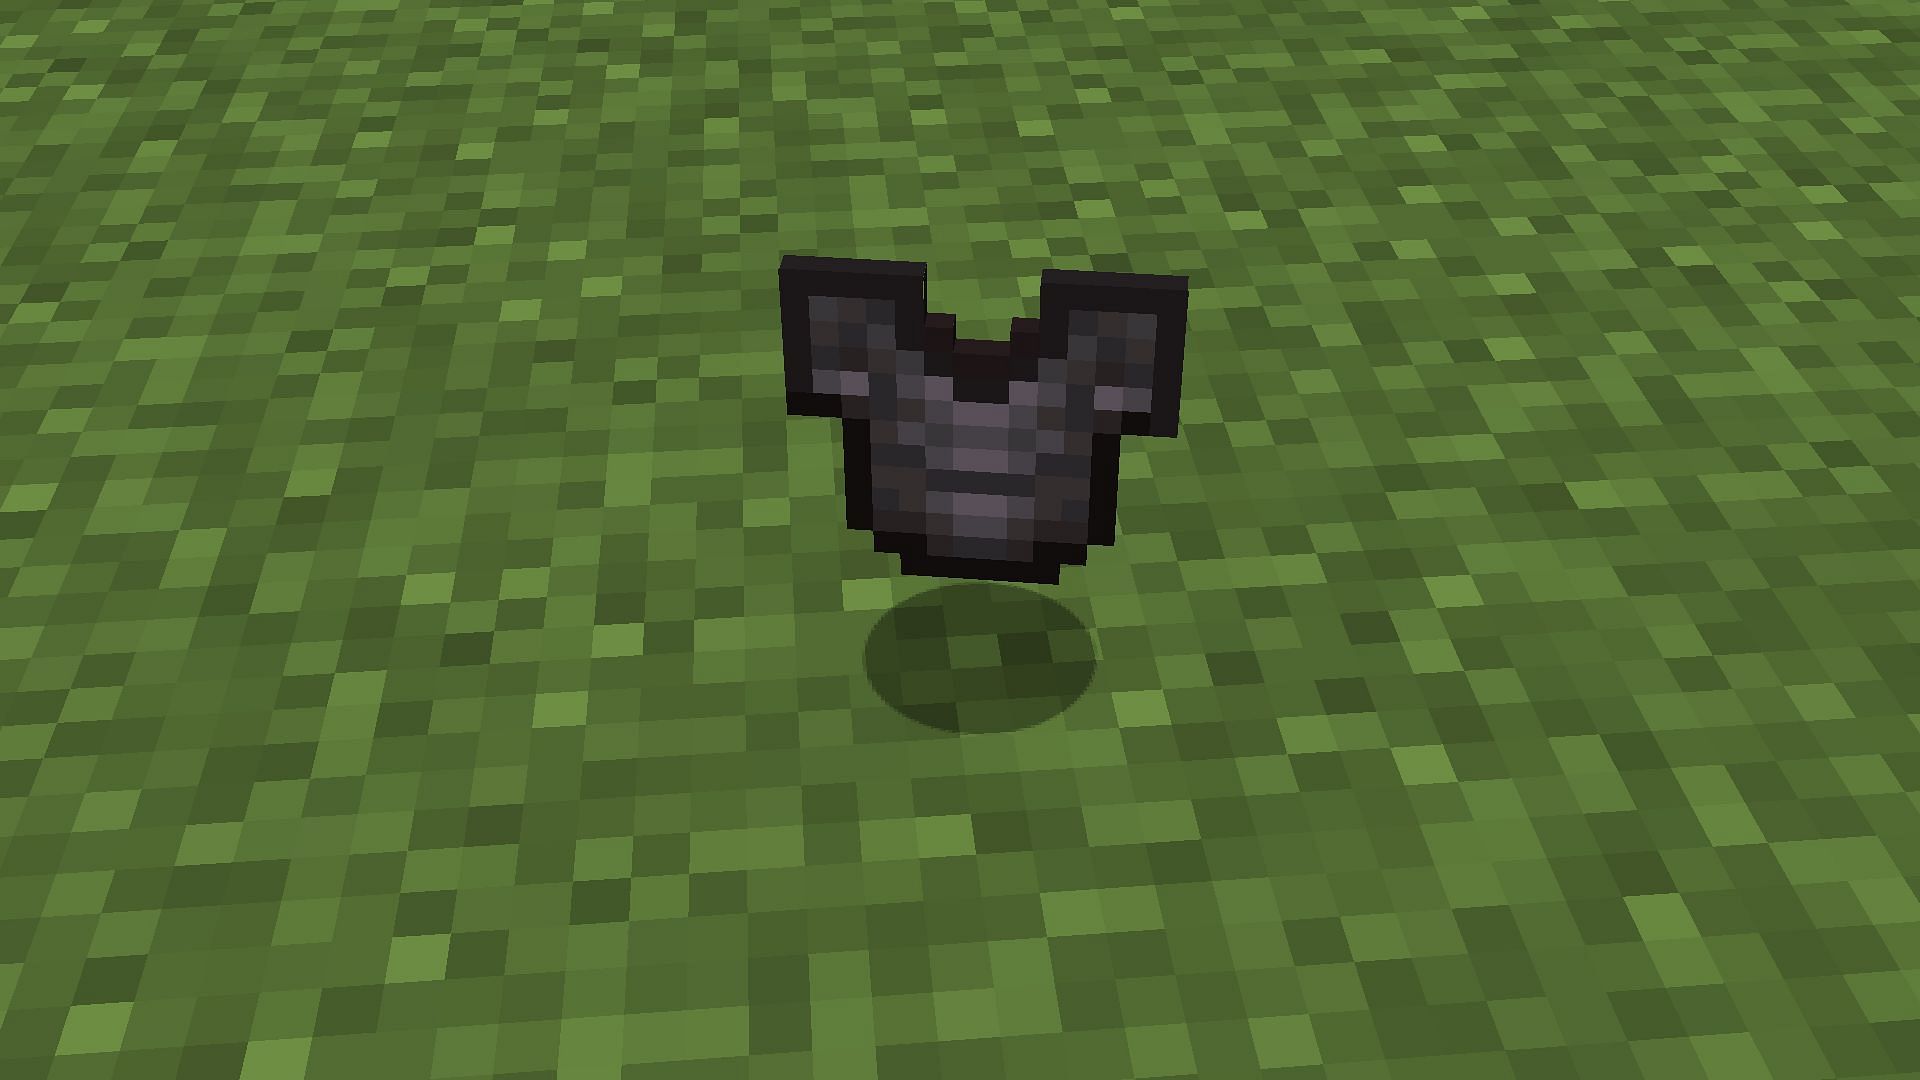 Armor enchantments are extremely important for a PvP fight in Minecraft (Image via Mojang)